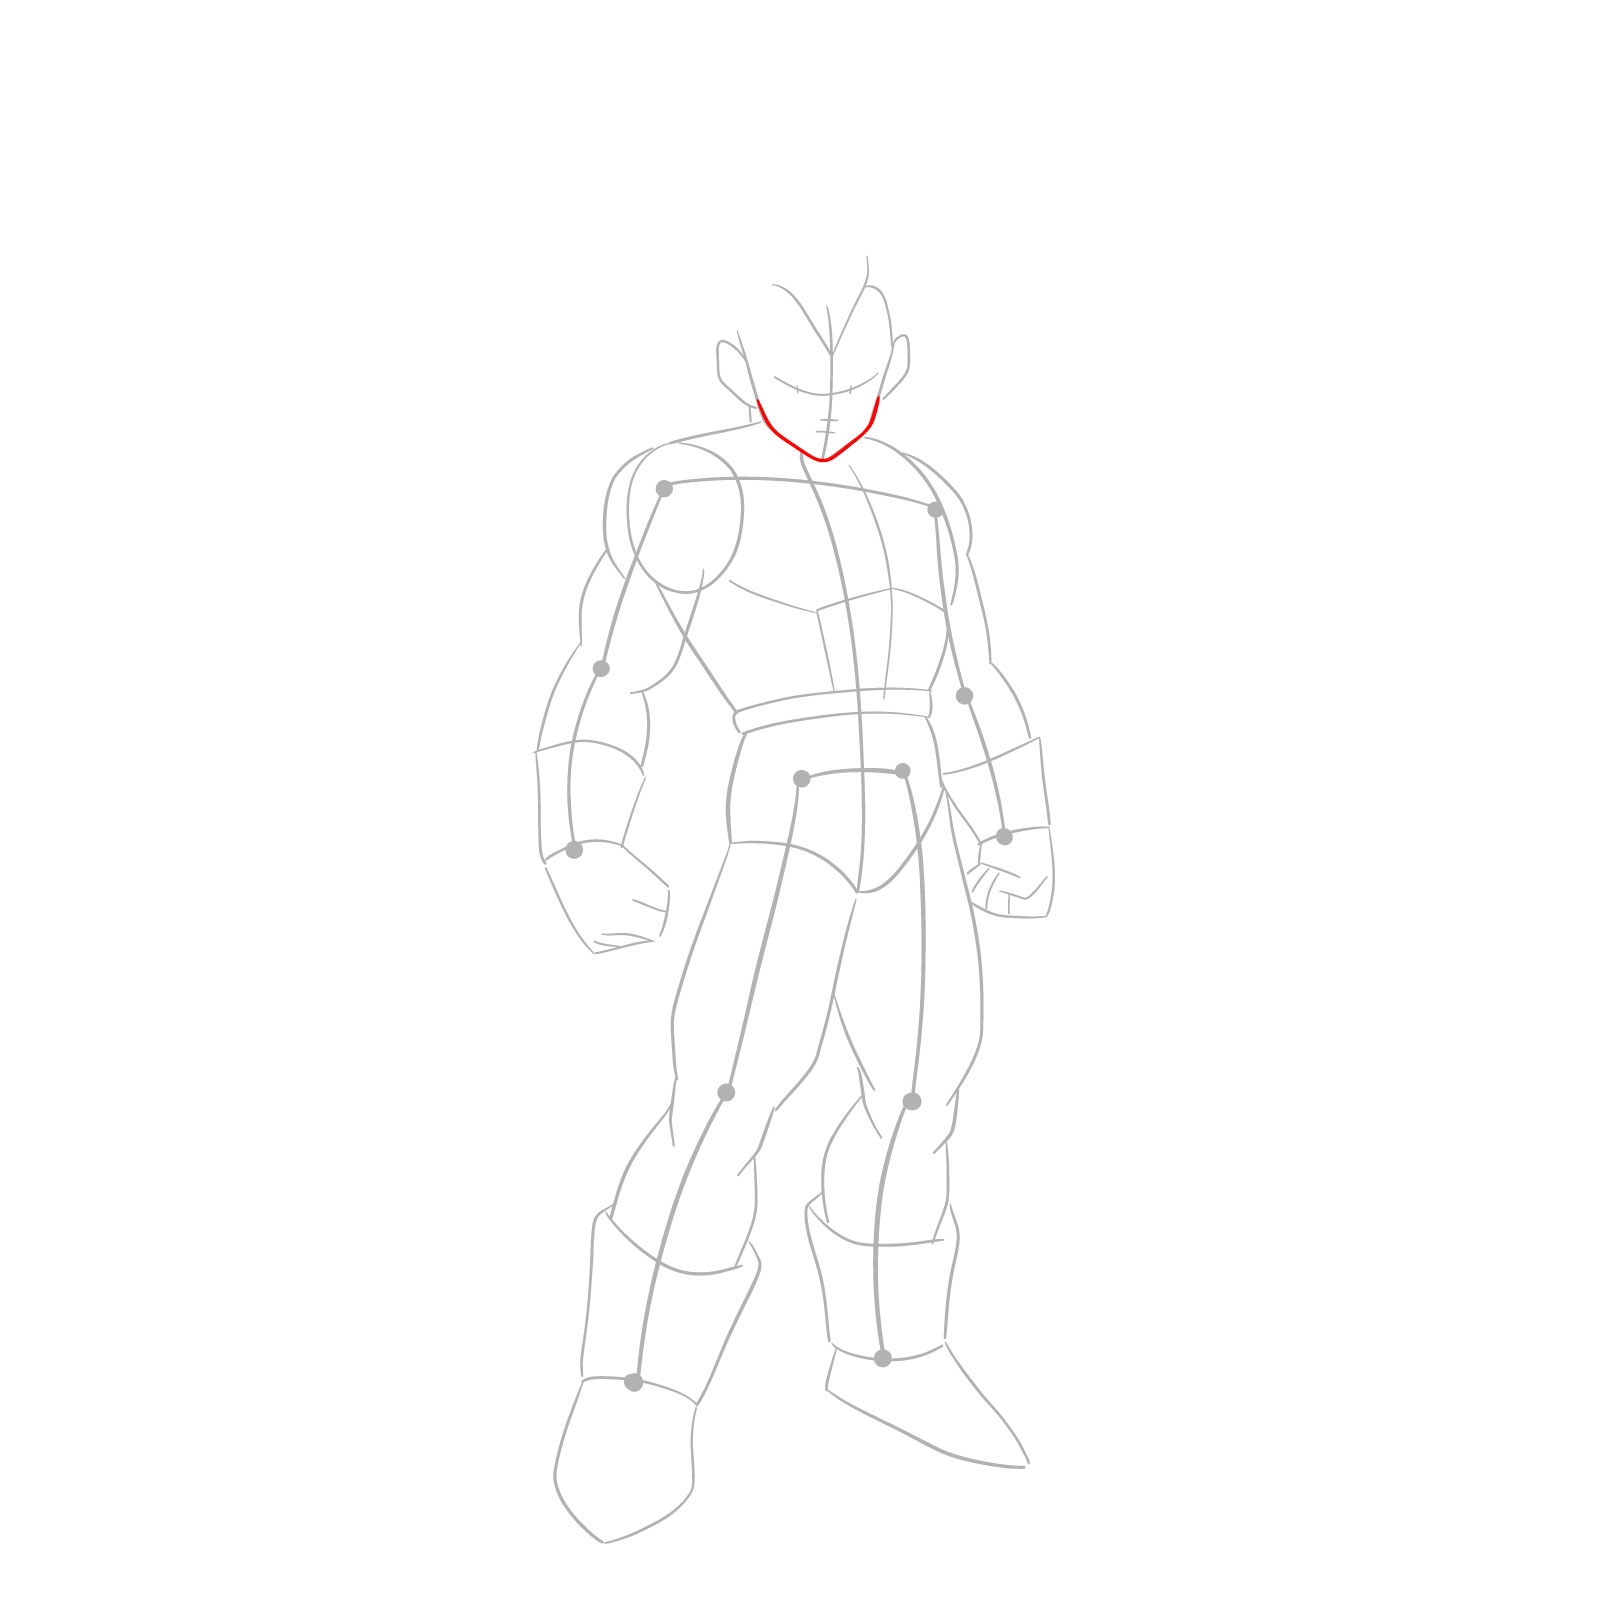 How to draw Vegeta in SSGSS - step 04